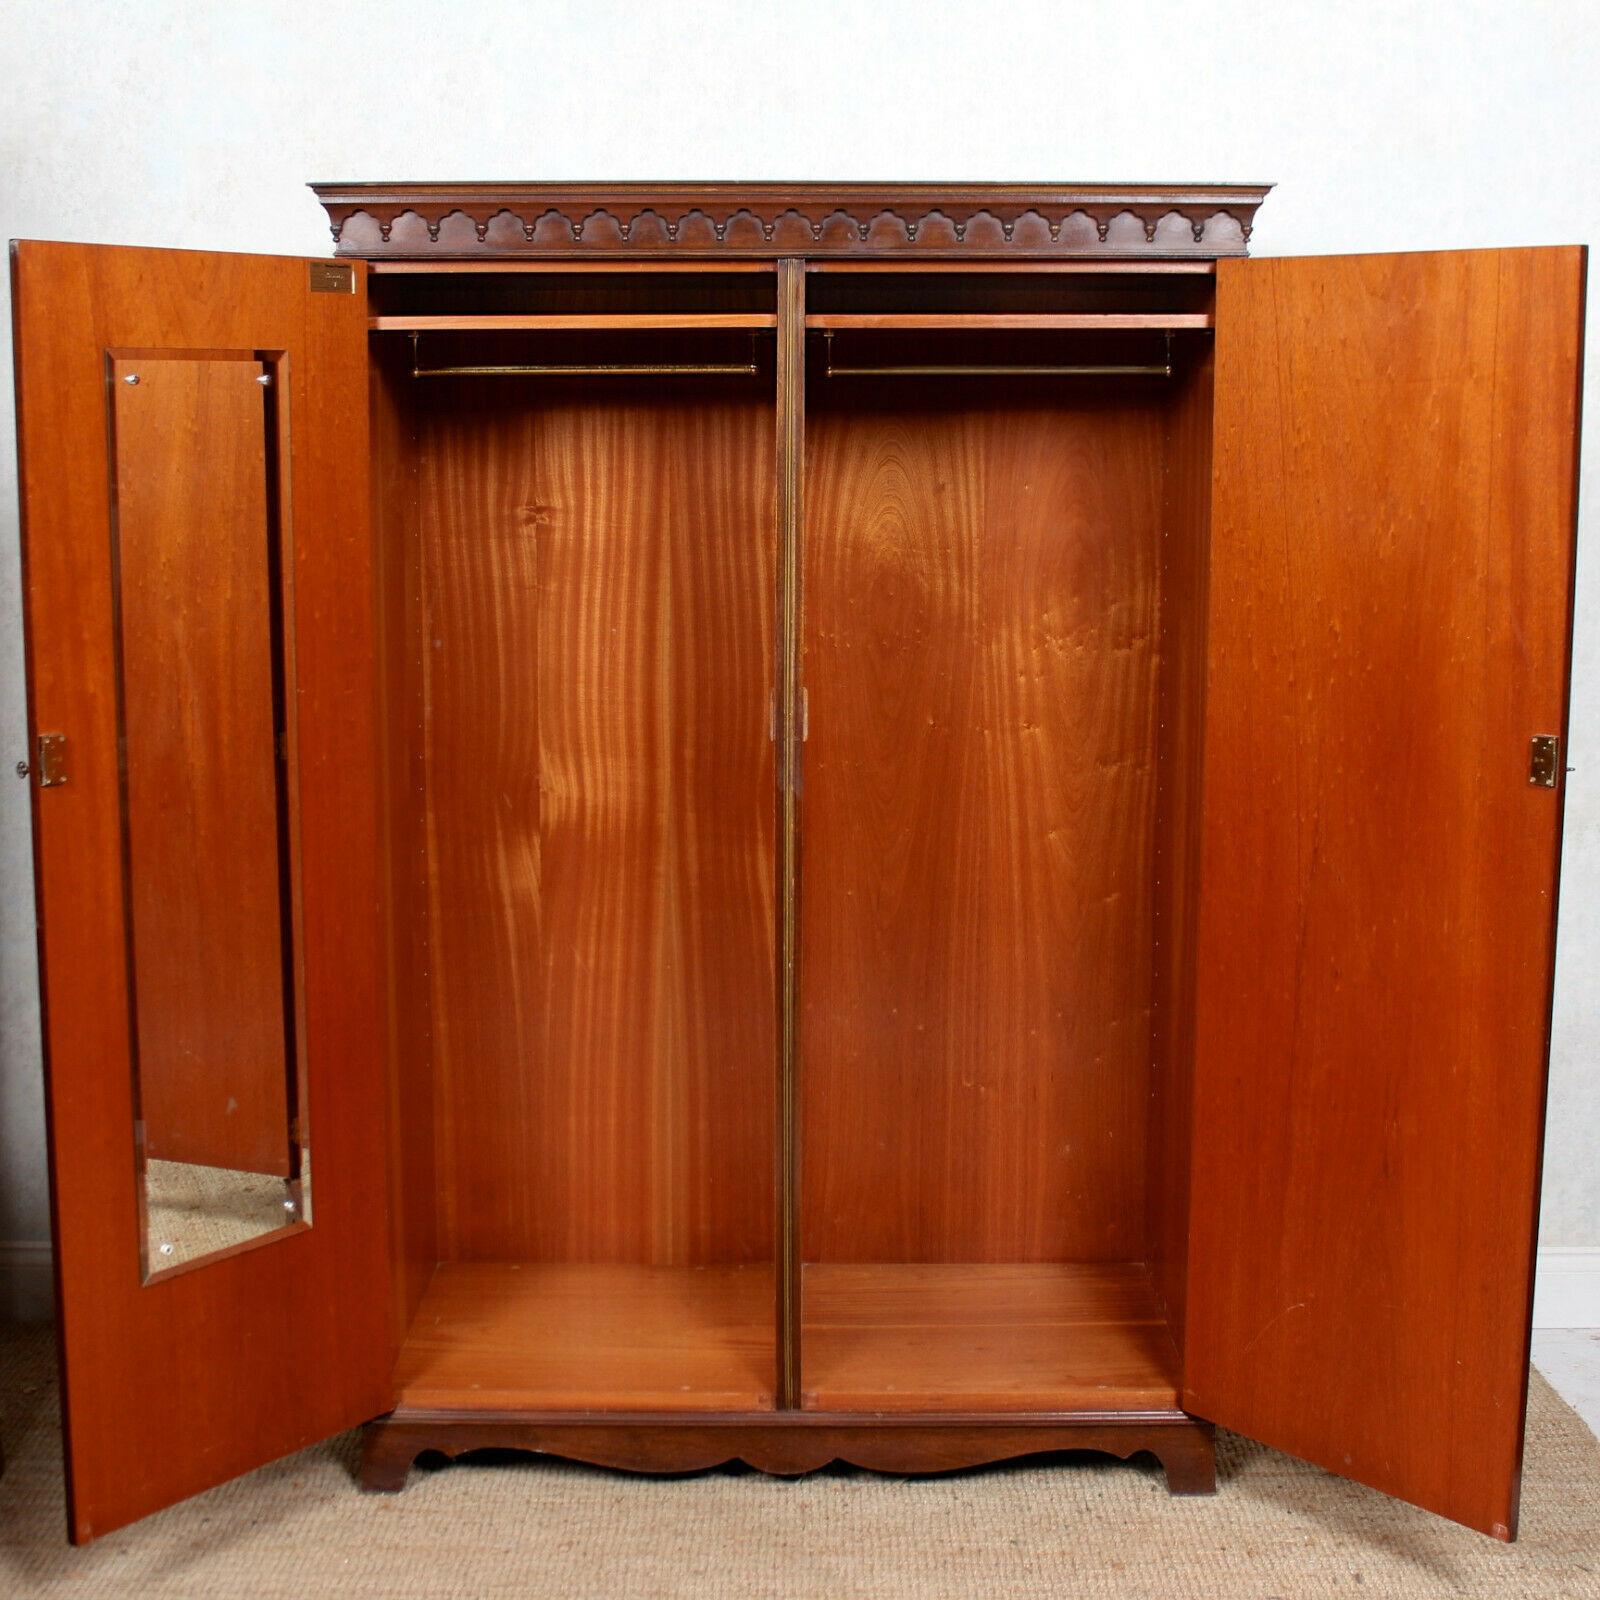 An impressive mahogany double wardrobe by Bevan Funnell.
The top with a carved arcadian cornice above double paneled doors and enclosed adjustable shelving and hanging rails, raised on a carved cutaway base and bracket feet.
England, 20th century.